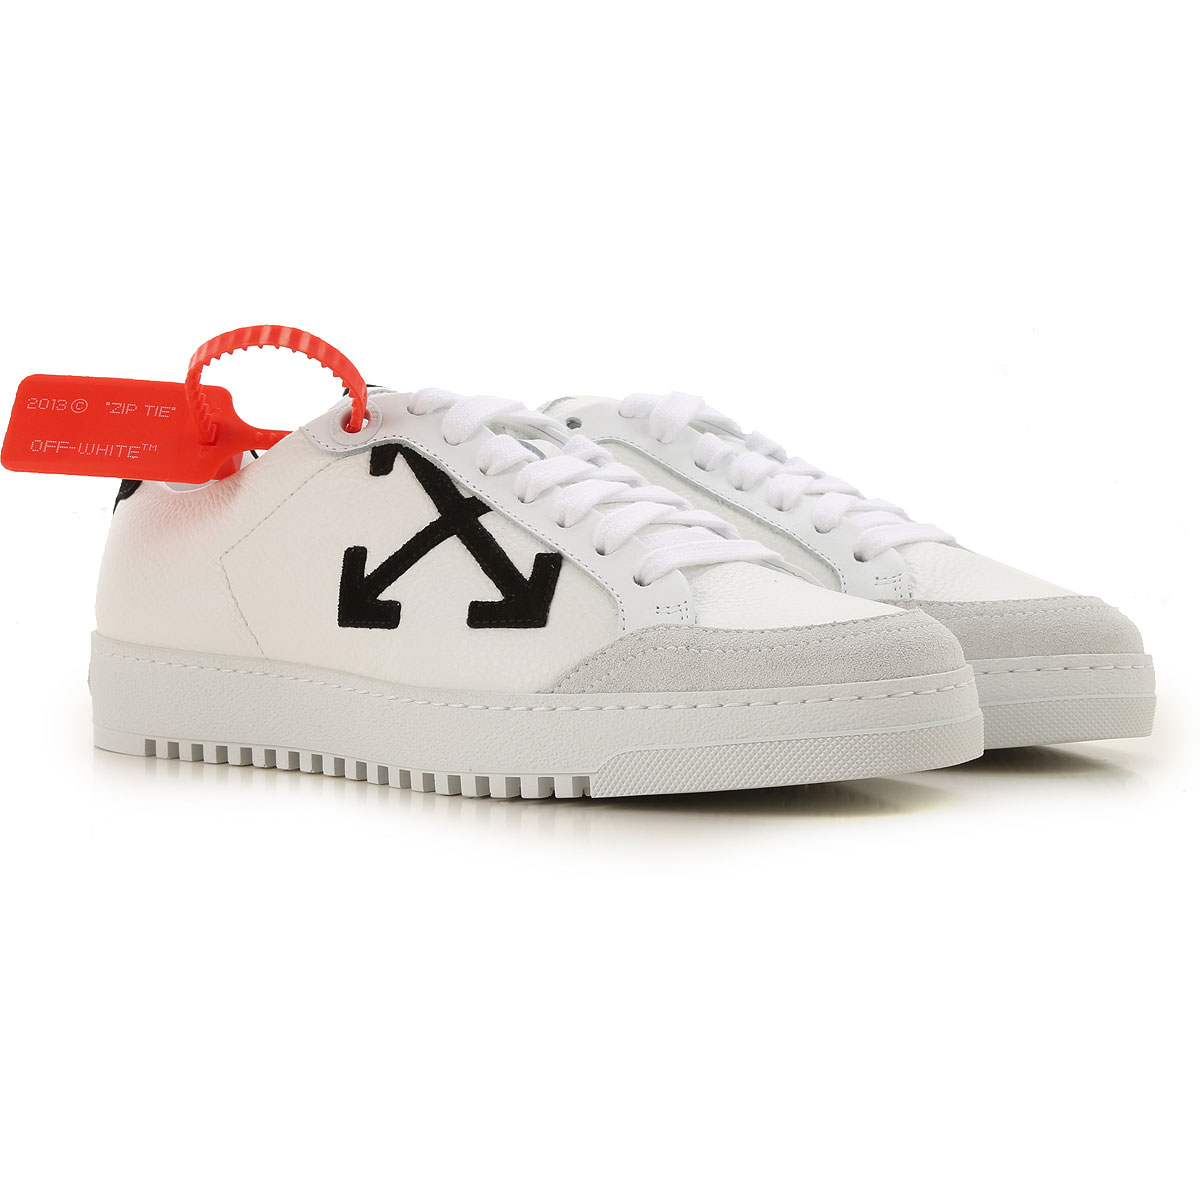 Womens Shoes Off-White Virgil Abloh, Style code: 0wia093s19d680340110--